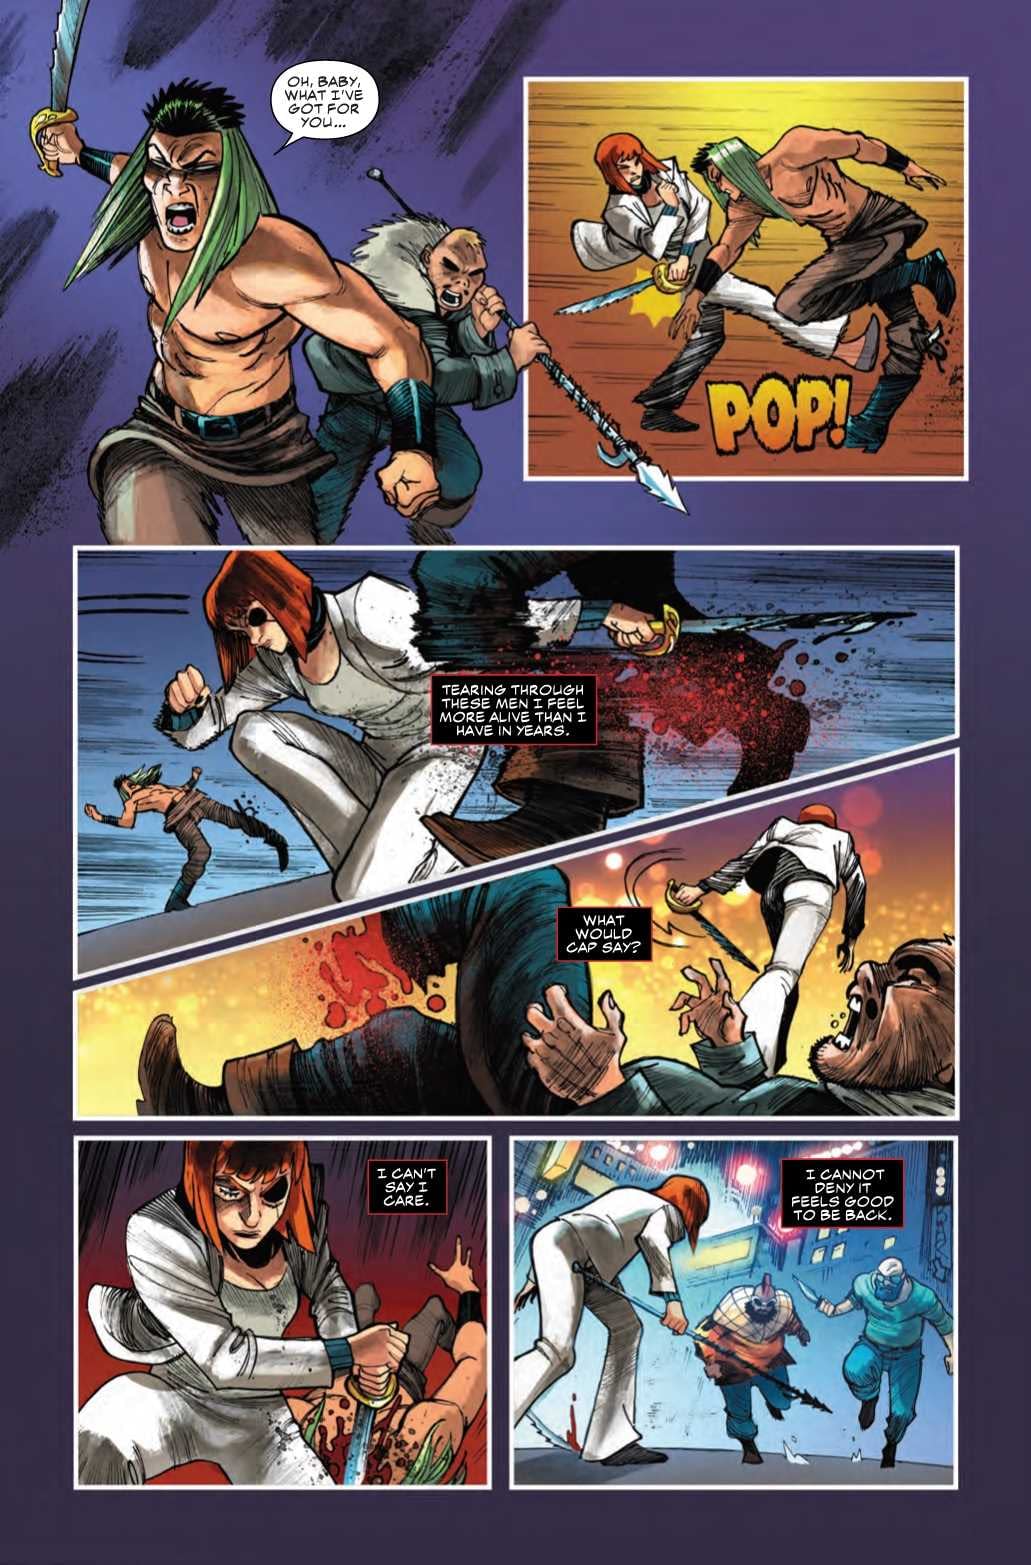 In Next Week's Black Widow #2, Natasha Shows Madripoor Pimpin' Ain't Easy (Preview)